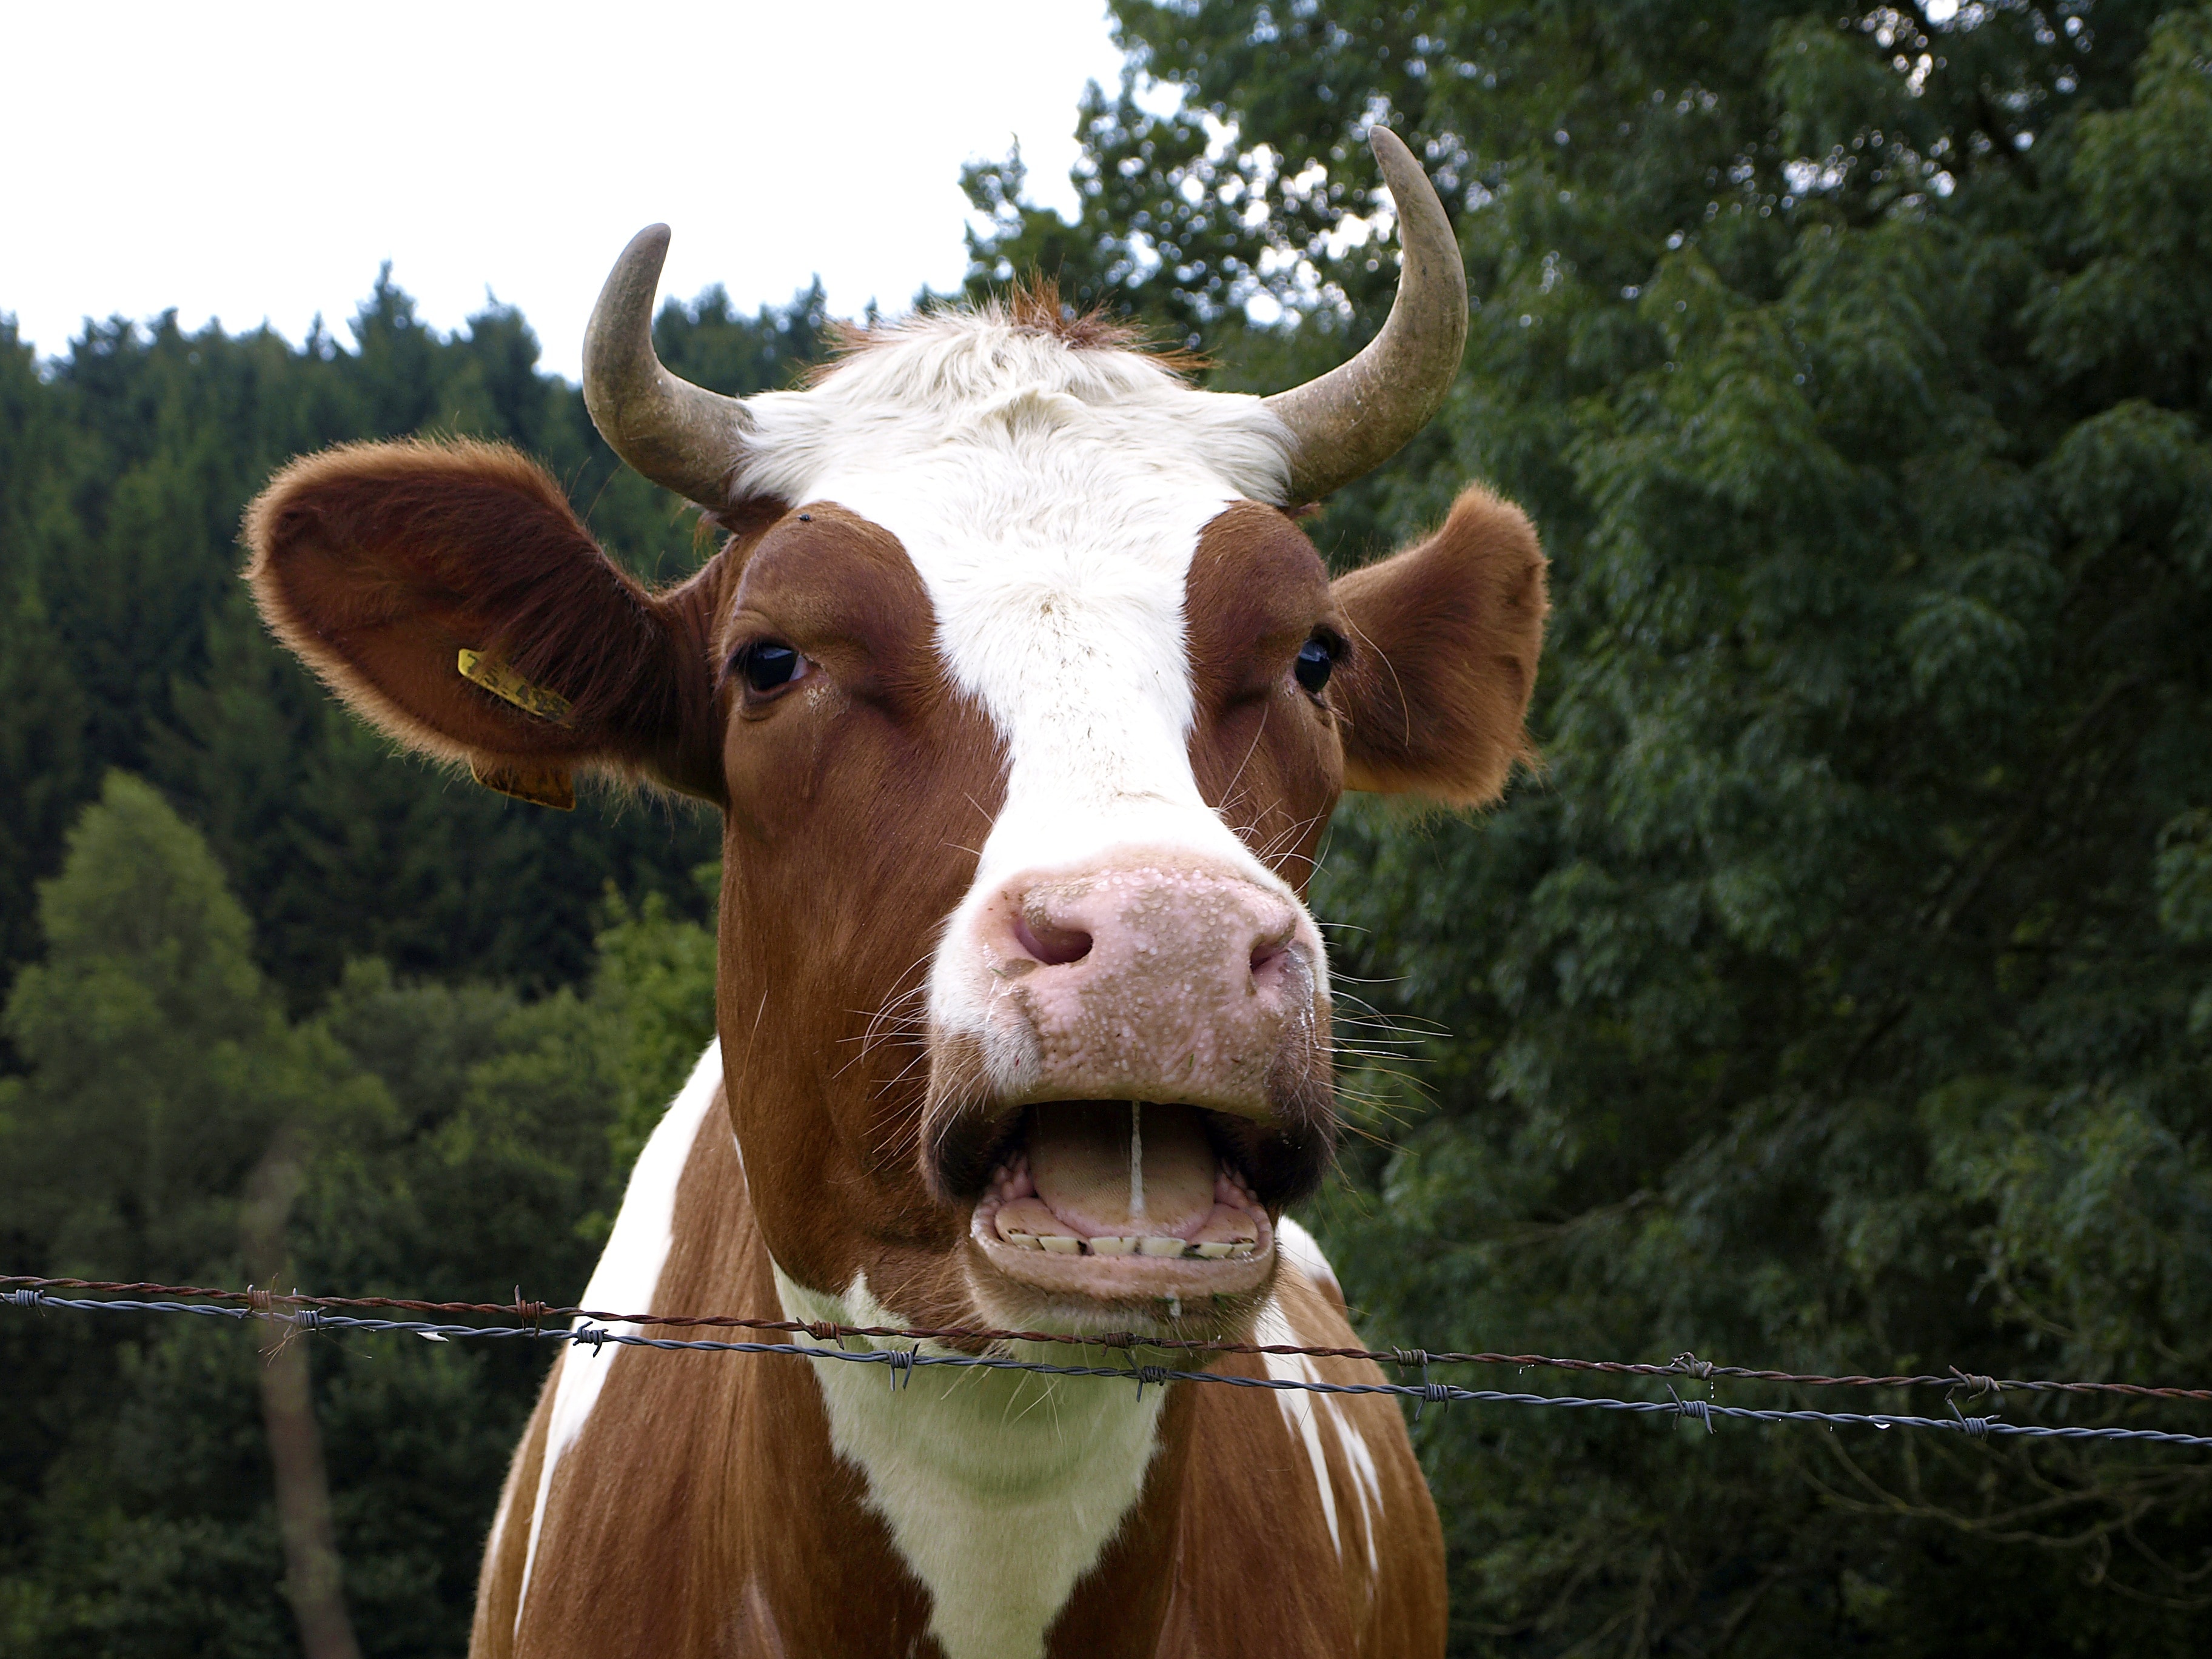 brown and white coated cow standing near steel fence during daytime